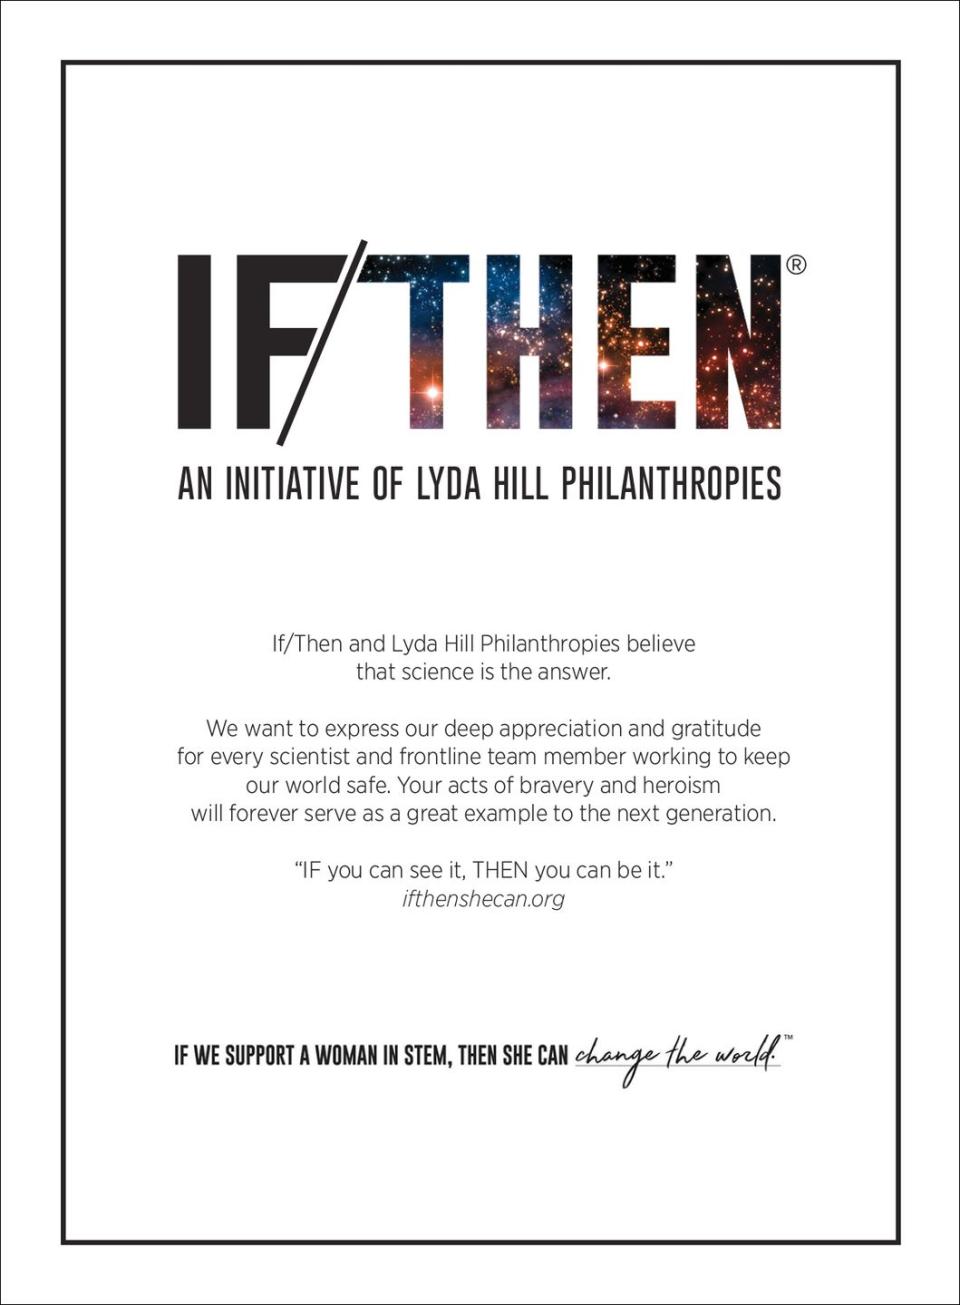 70) If/Then (An Initiative of Lyda Hill Philanthropies)